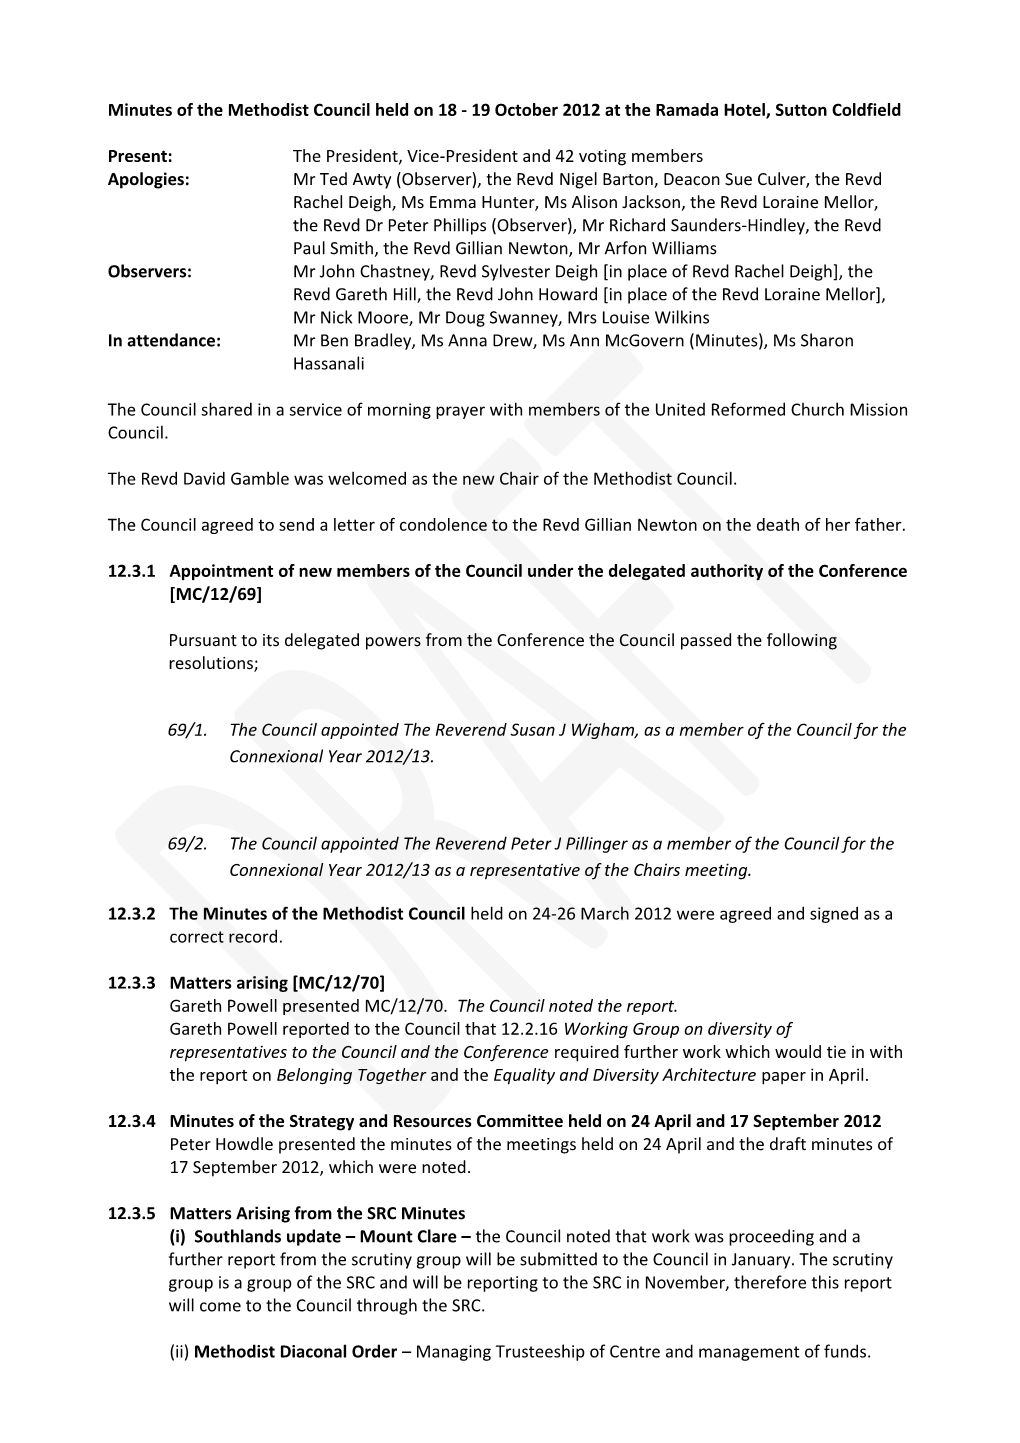 Minutes of the Methodist Council Held on 18-19 October 2012 at the Ramada Hotel, Sutton